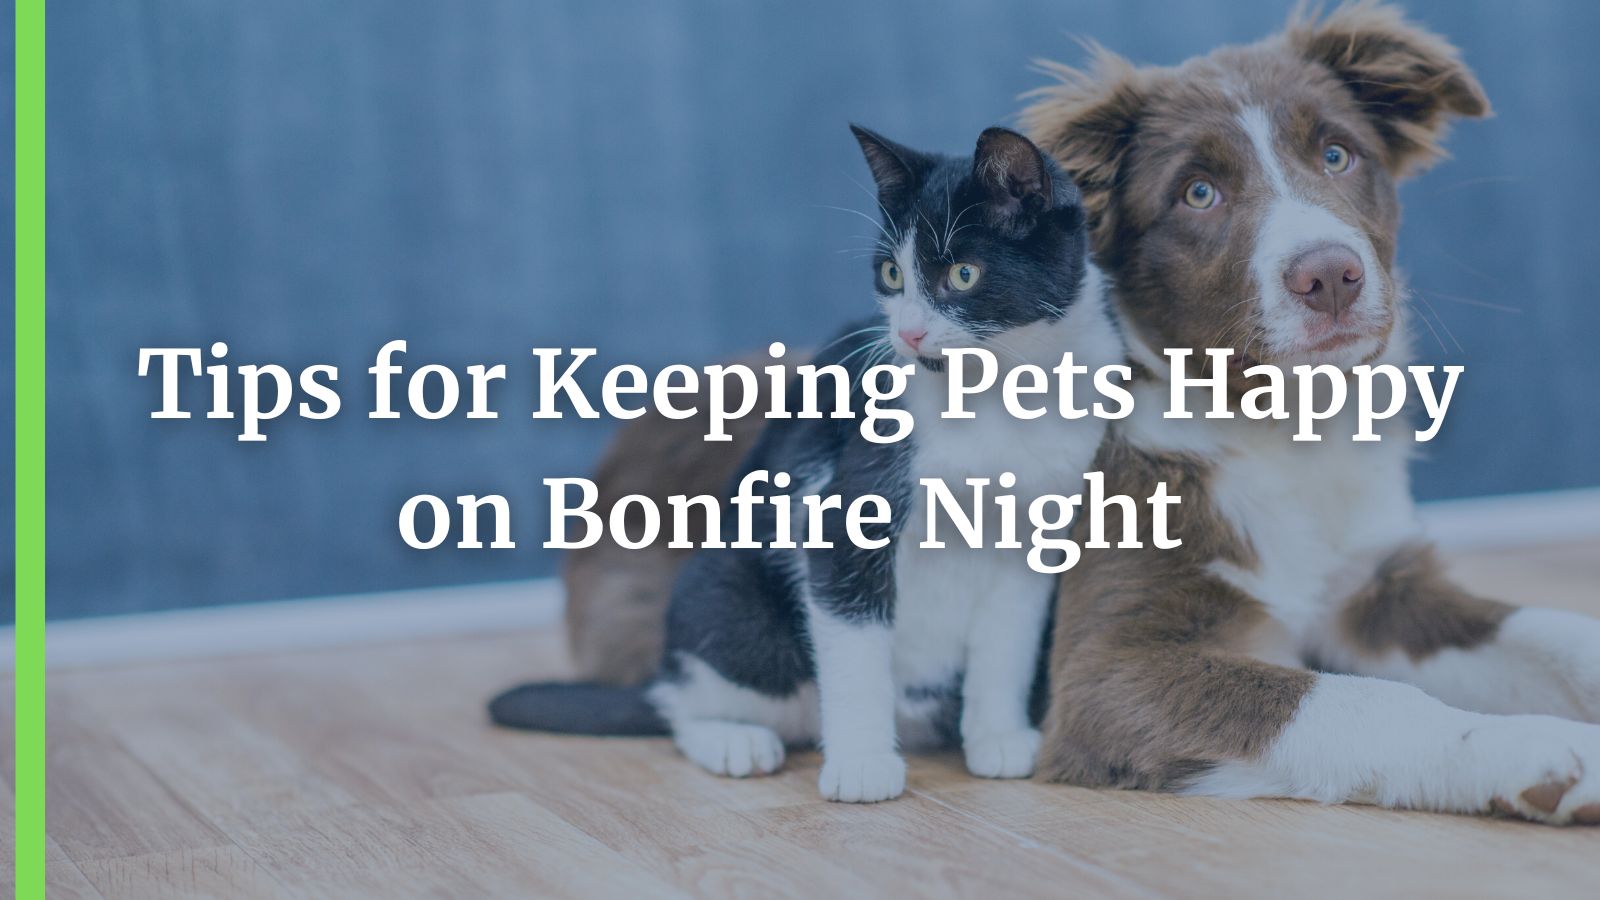 Tips for Keeping Pets Happy on Bonfire Night 